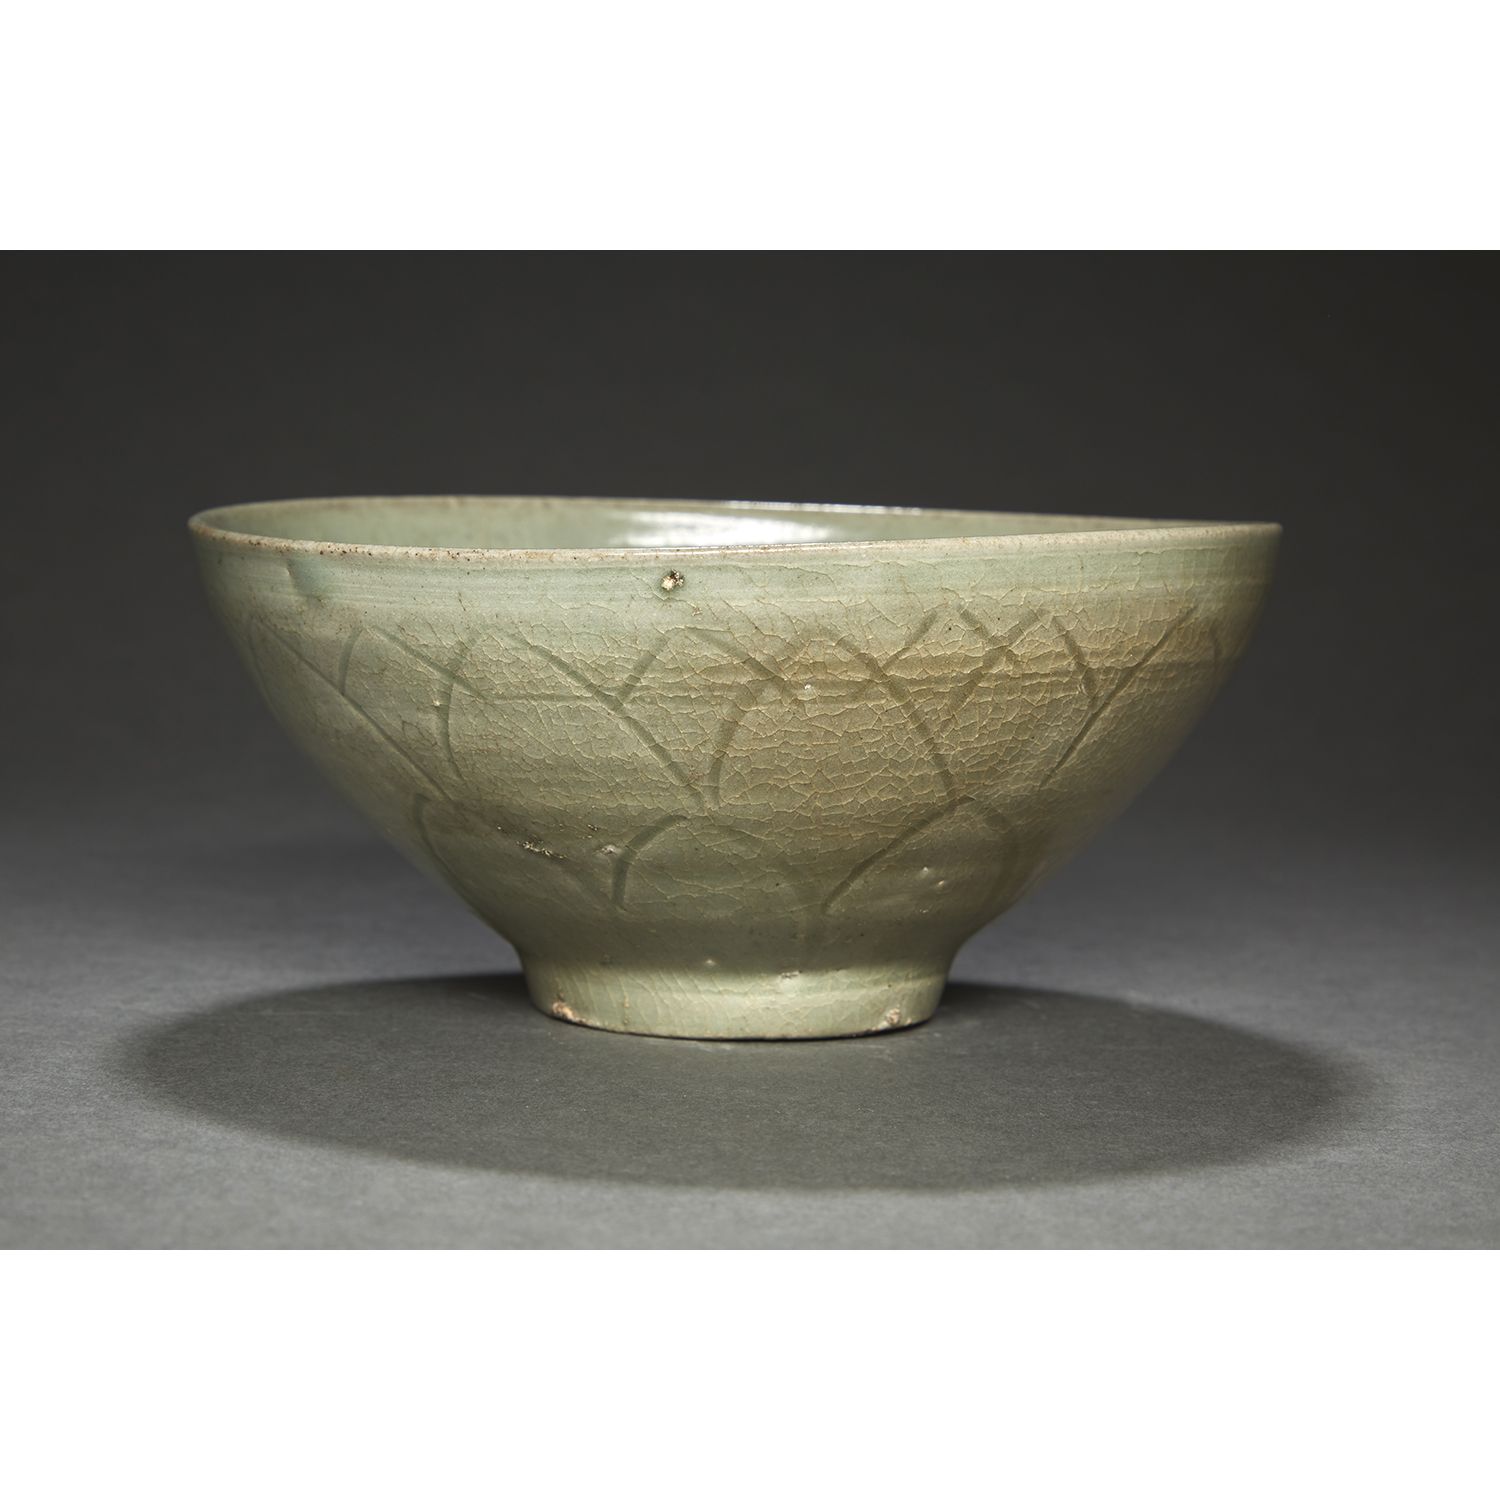 Null CUP
in olive green glazed stoneware on a crackled ground, with stylized lot&hellip;